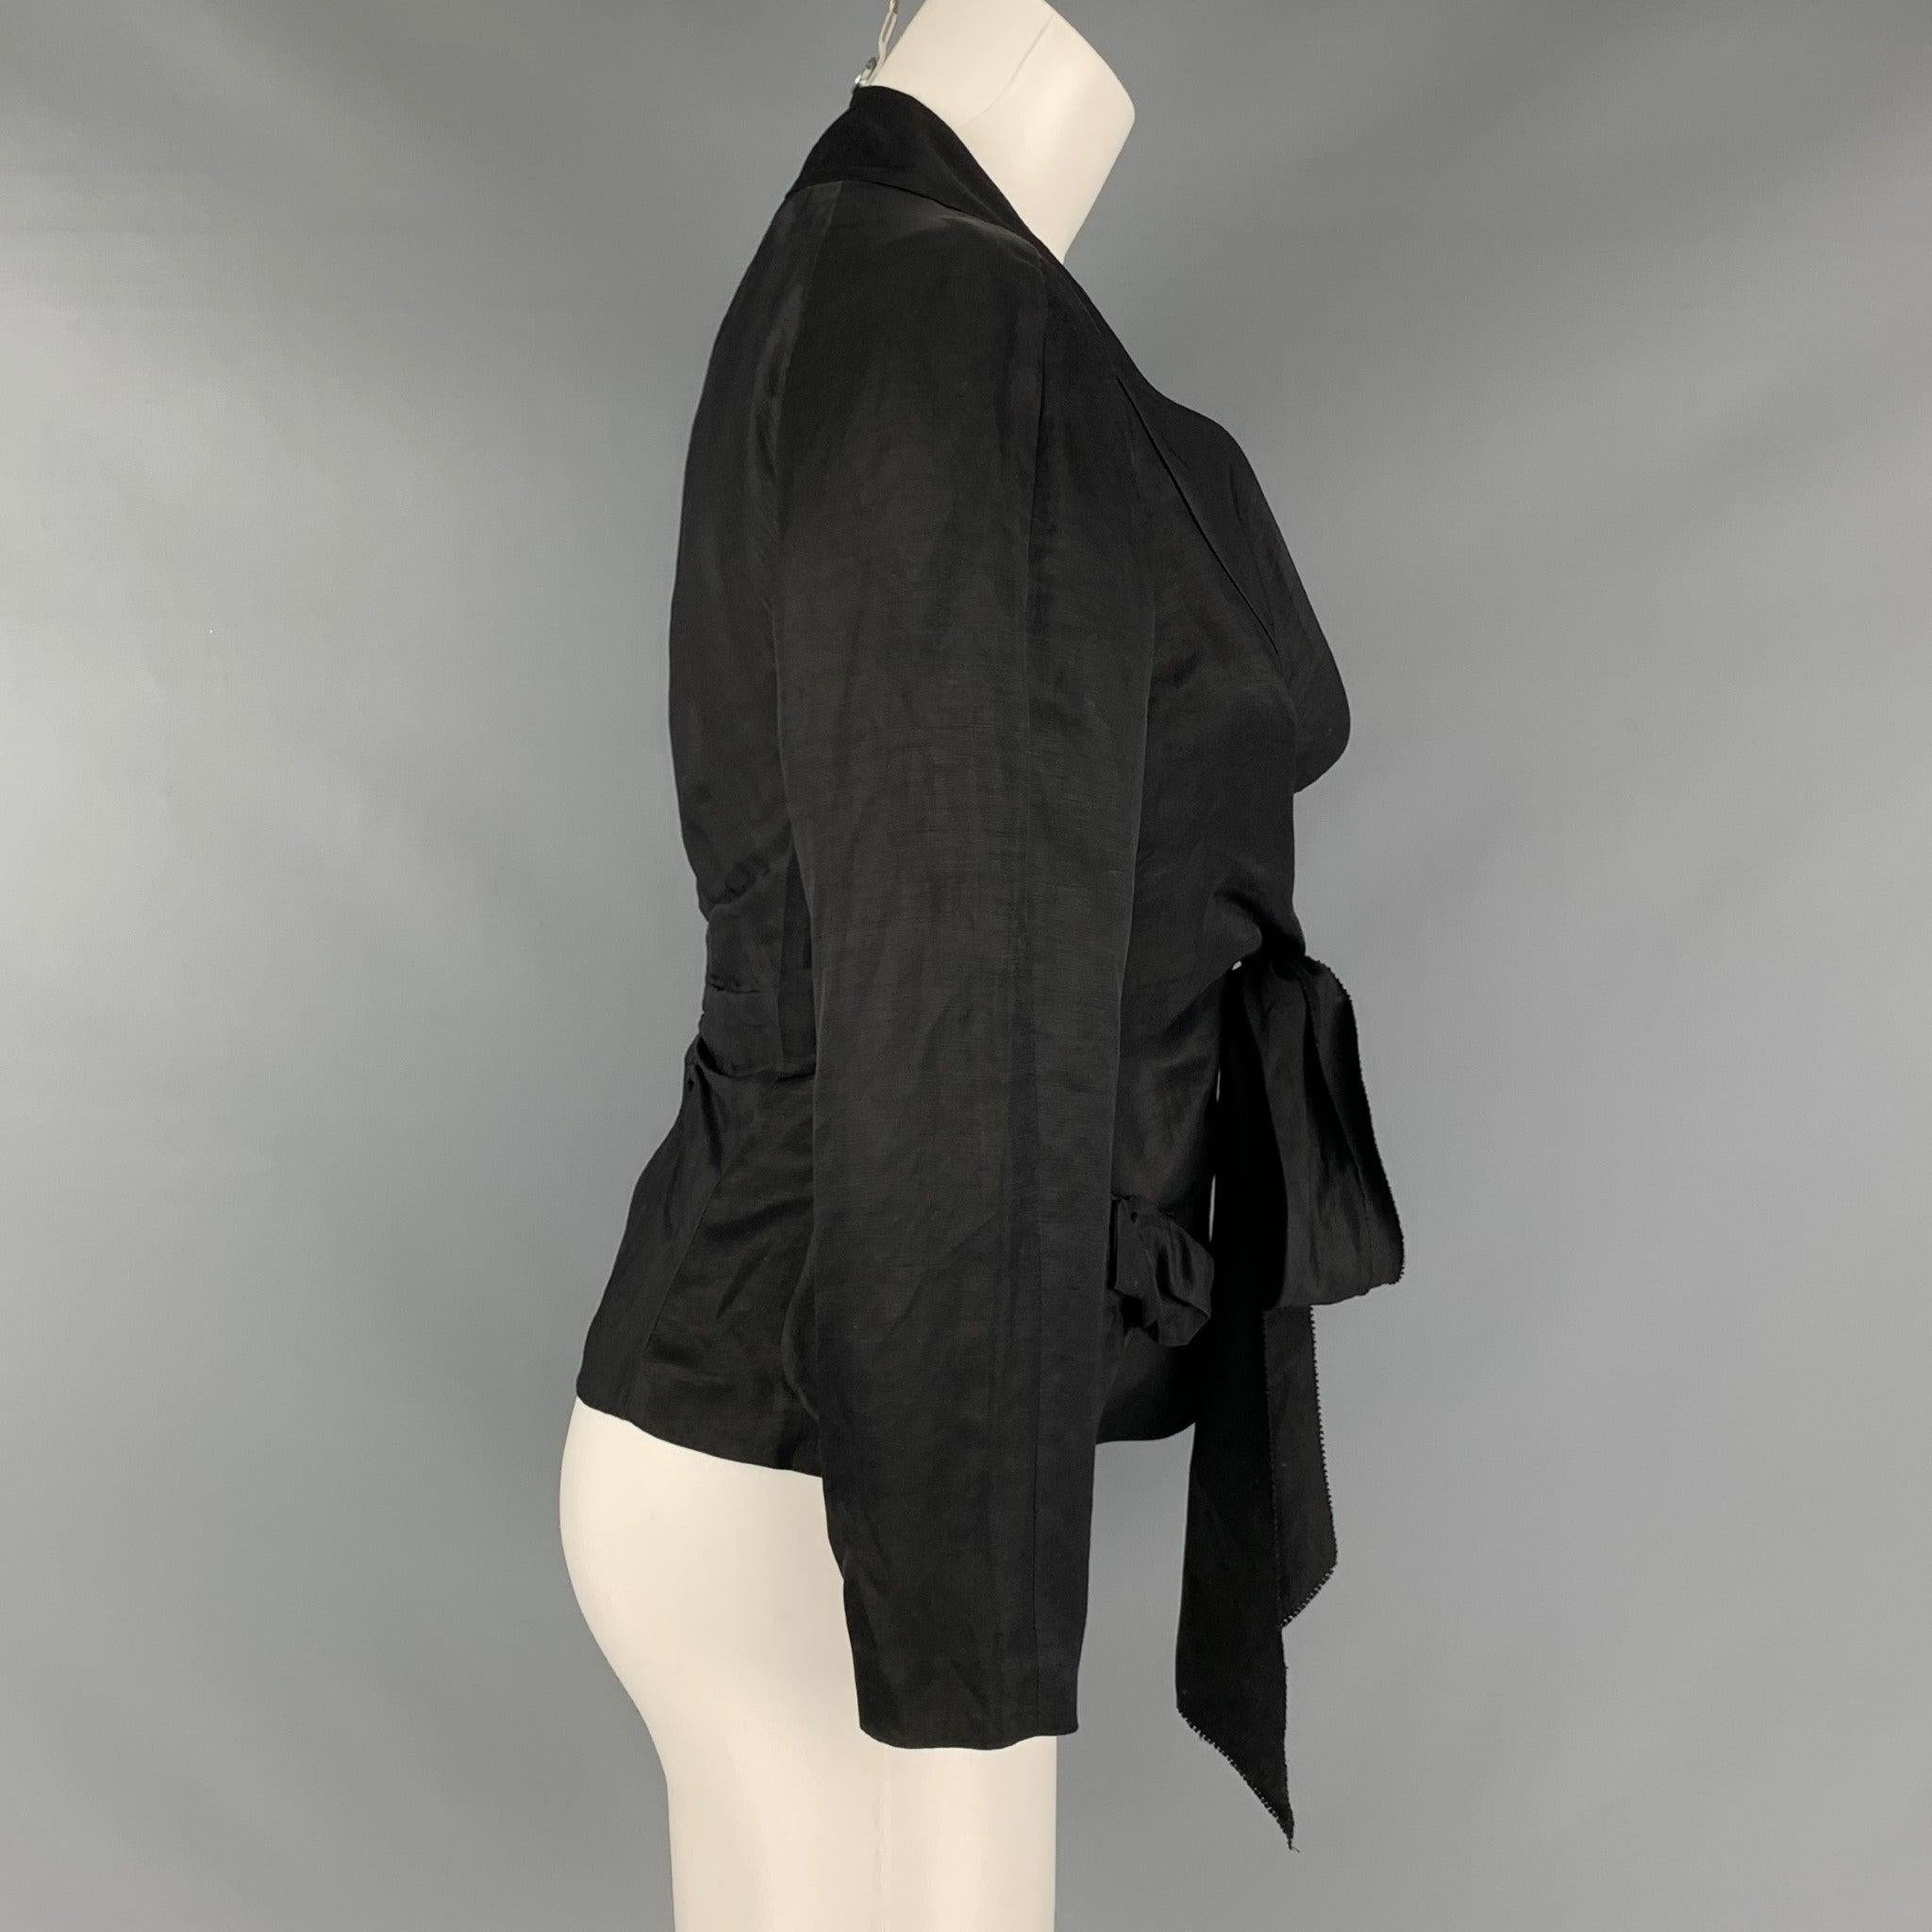 DONNA KARAN jacket comes in a black linen and viscose woven featuring a shawl collar, front tie detail, and a single button closure. Made in Italy.Very Good Pre-Owned Condition. 

Marked:    

Measurements: 
 
Shoulder: 12 inches Bust: 35 inches